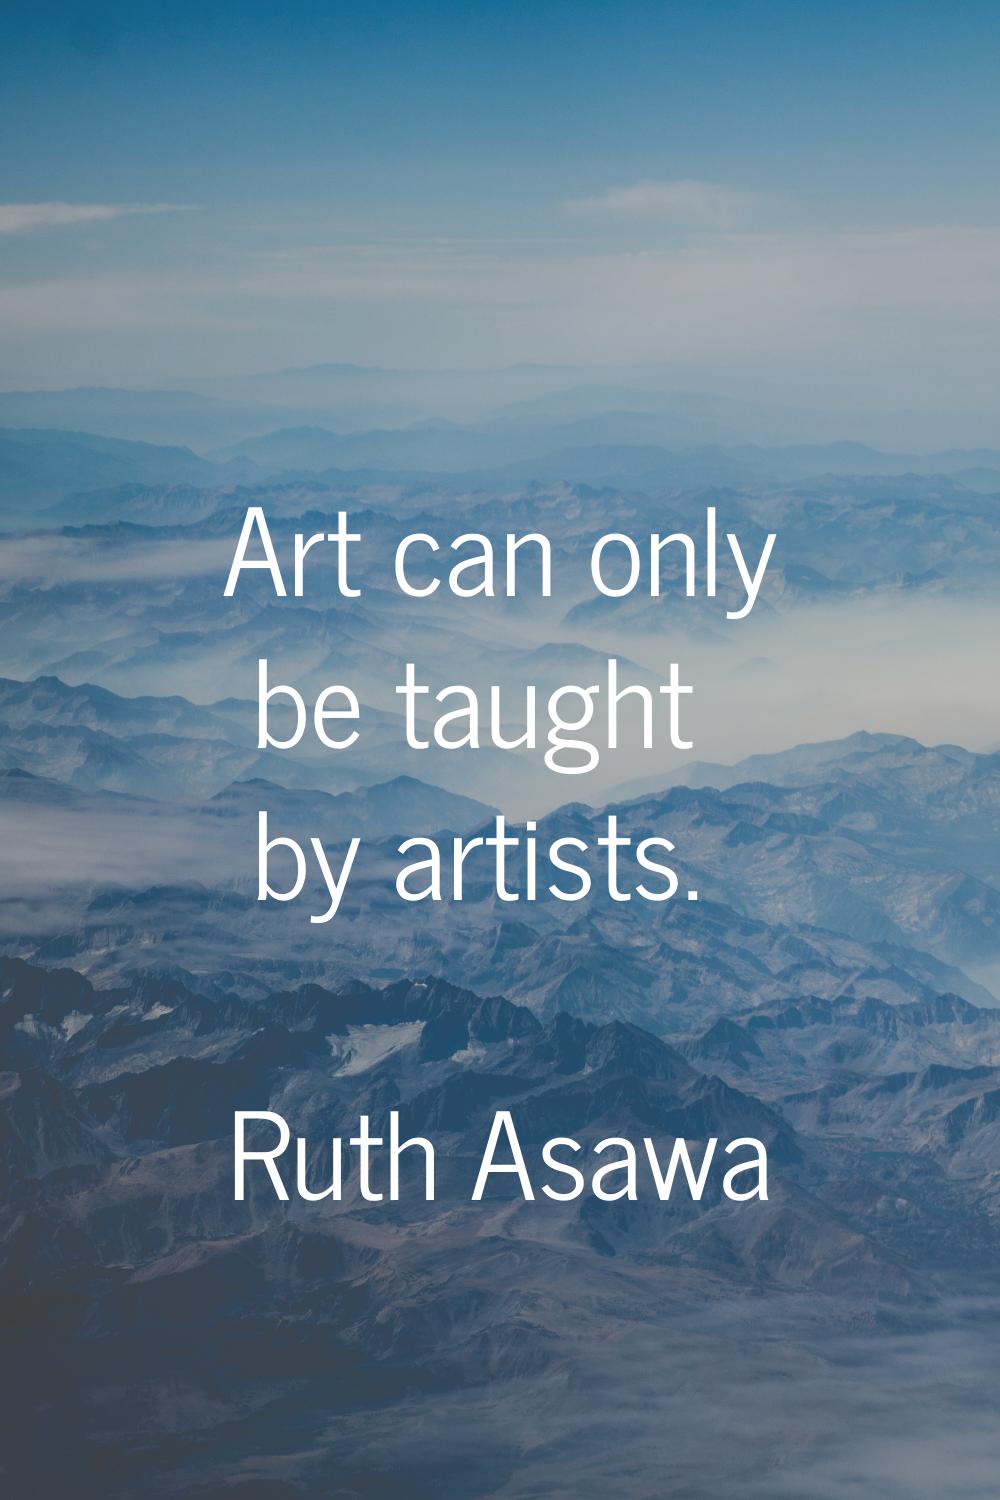 Art can only be taught by artists.